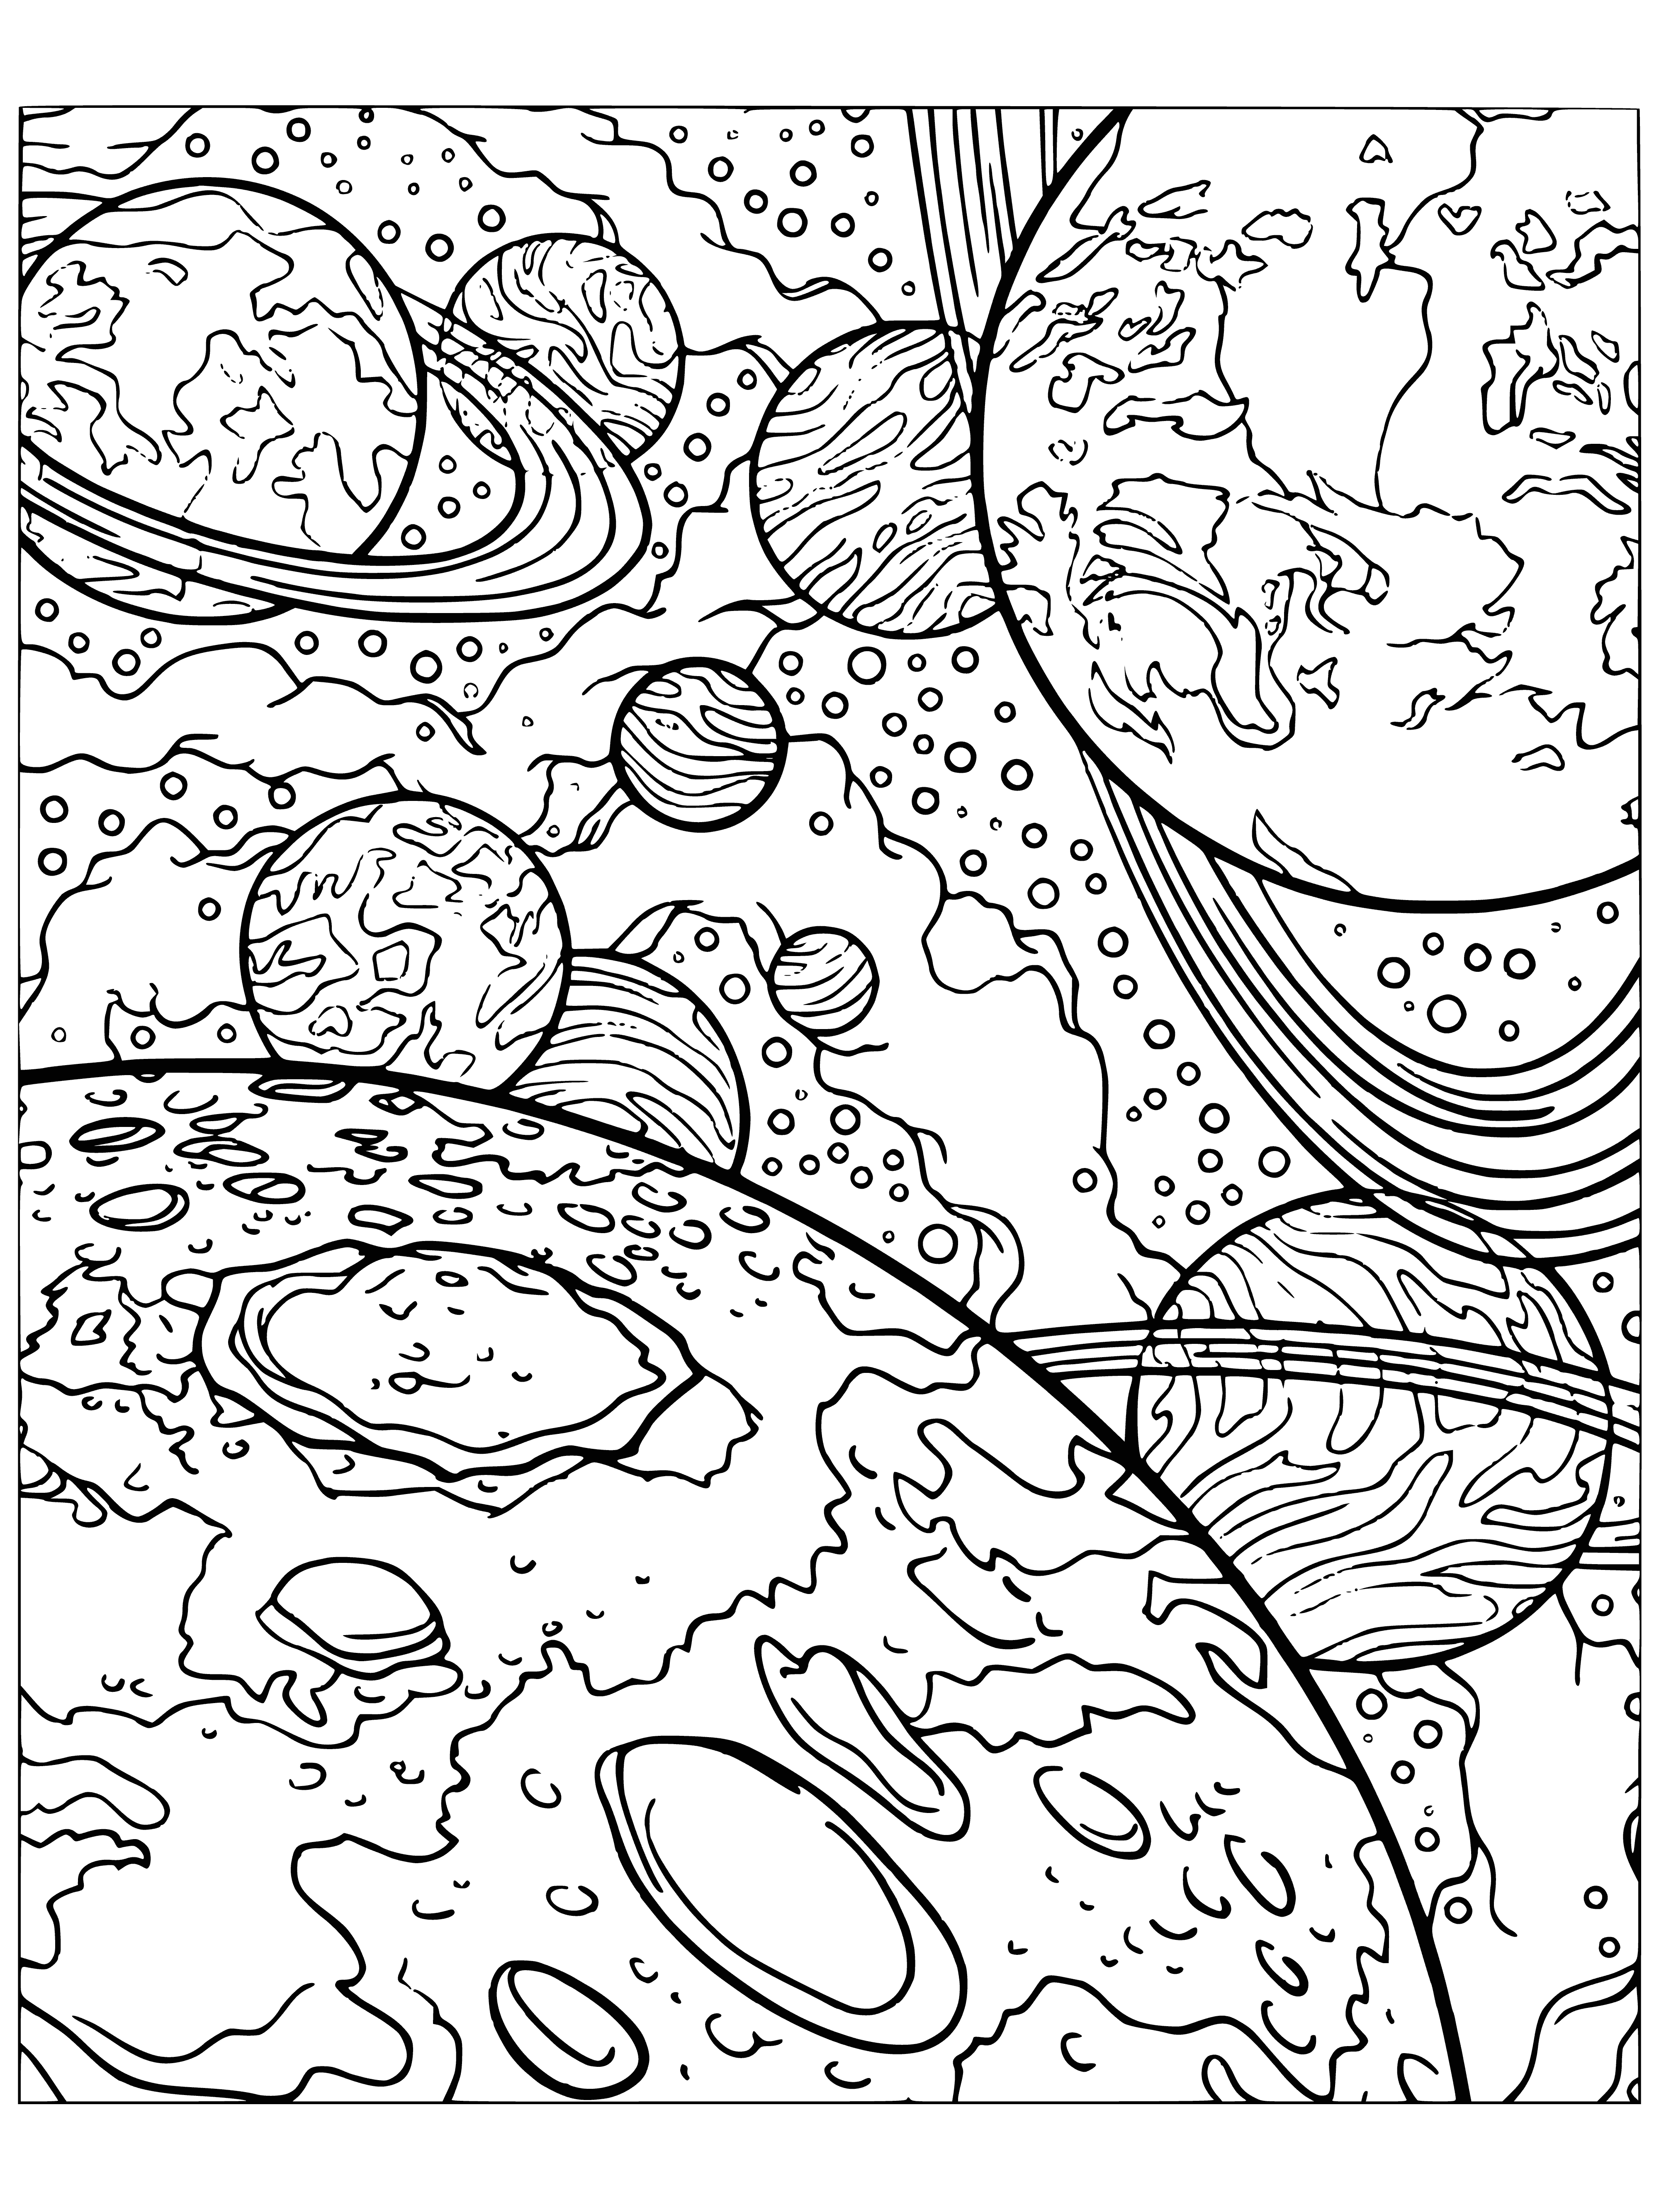 Universe coloring page